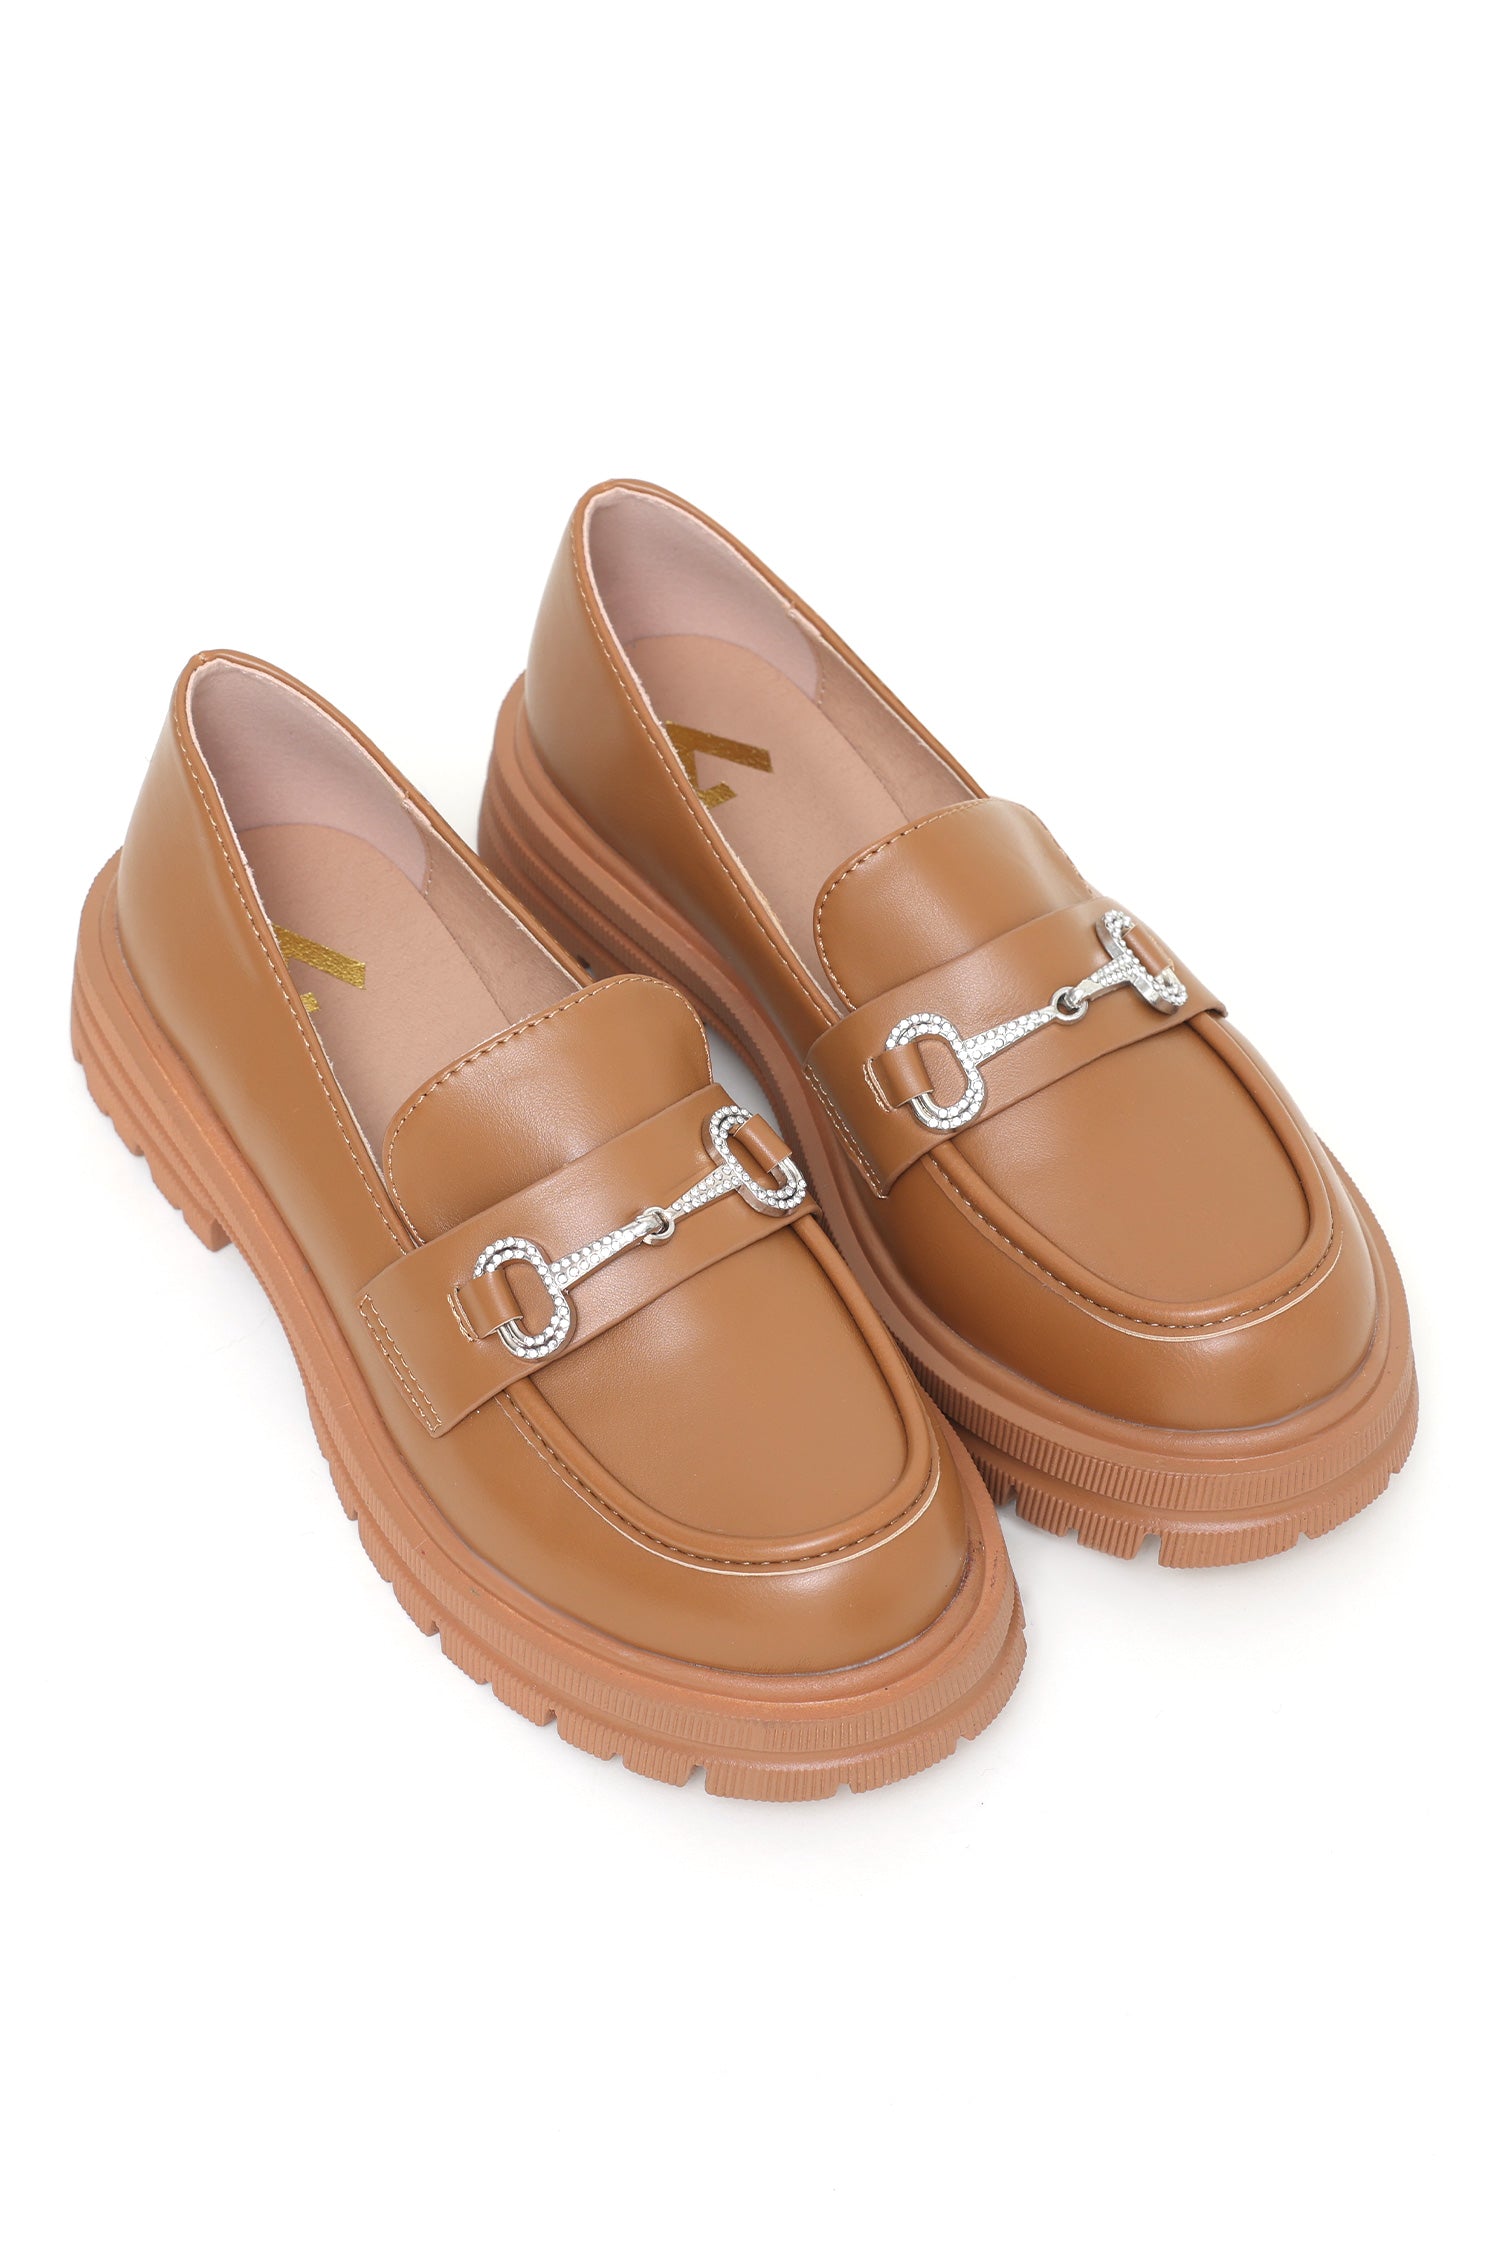 CHUNKY LOAFERS-CAMEL